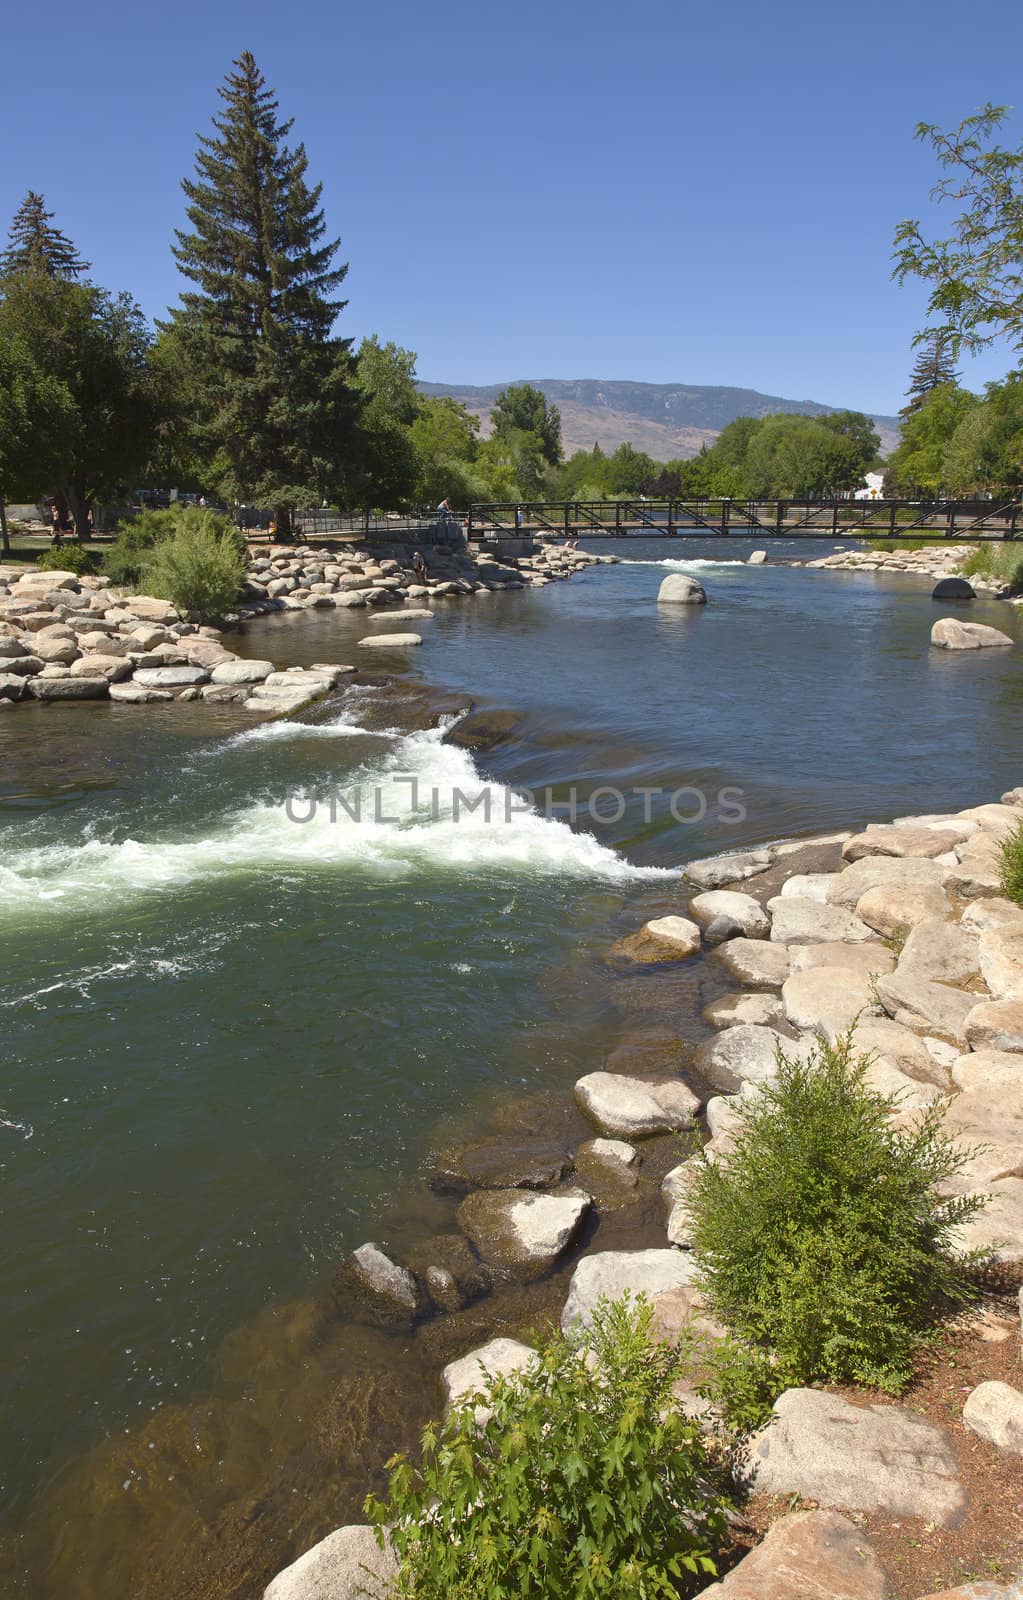 Riverflow rocks and surroundings in downtown Reno NV.